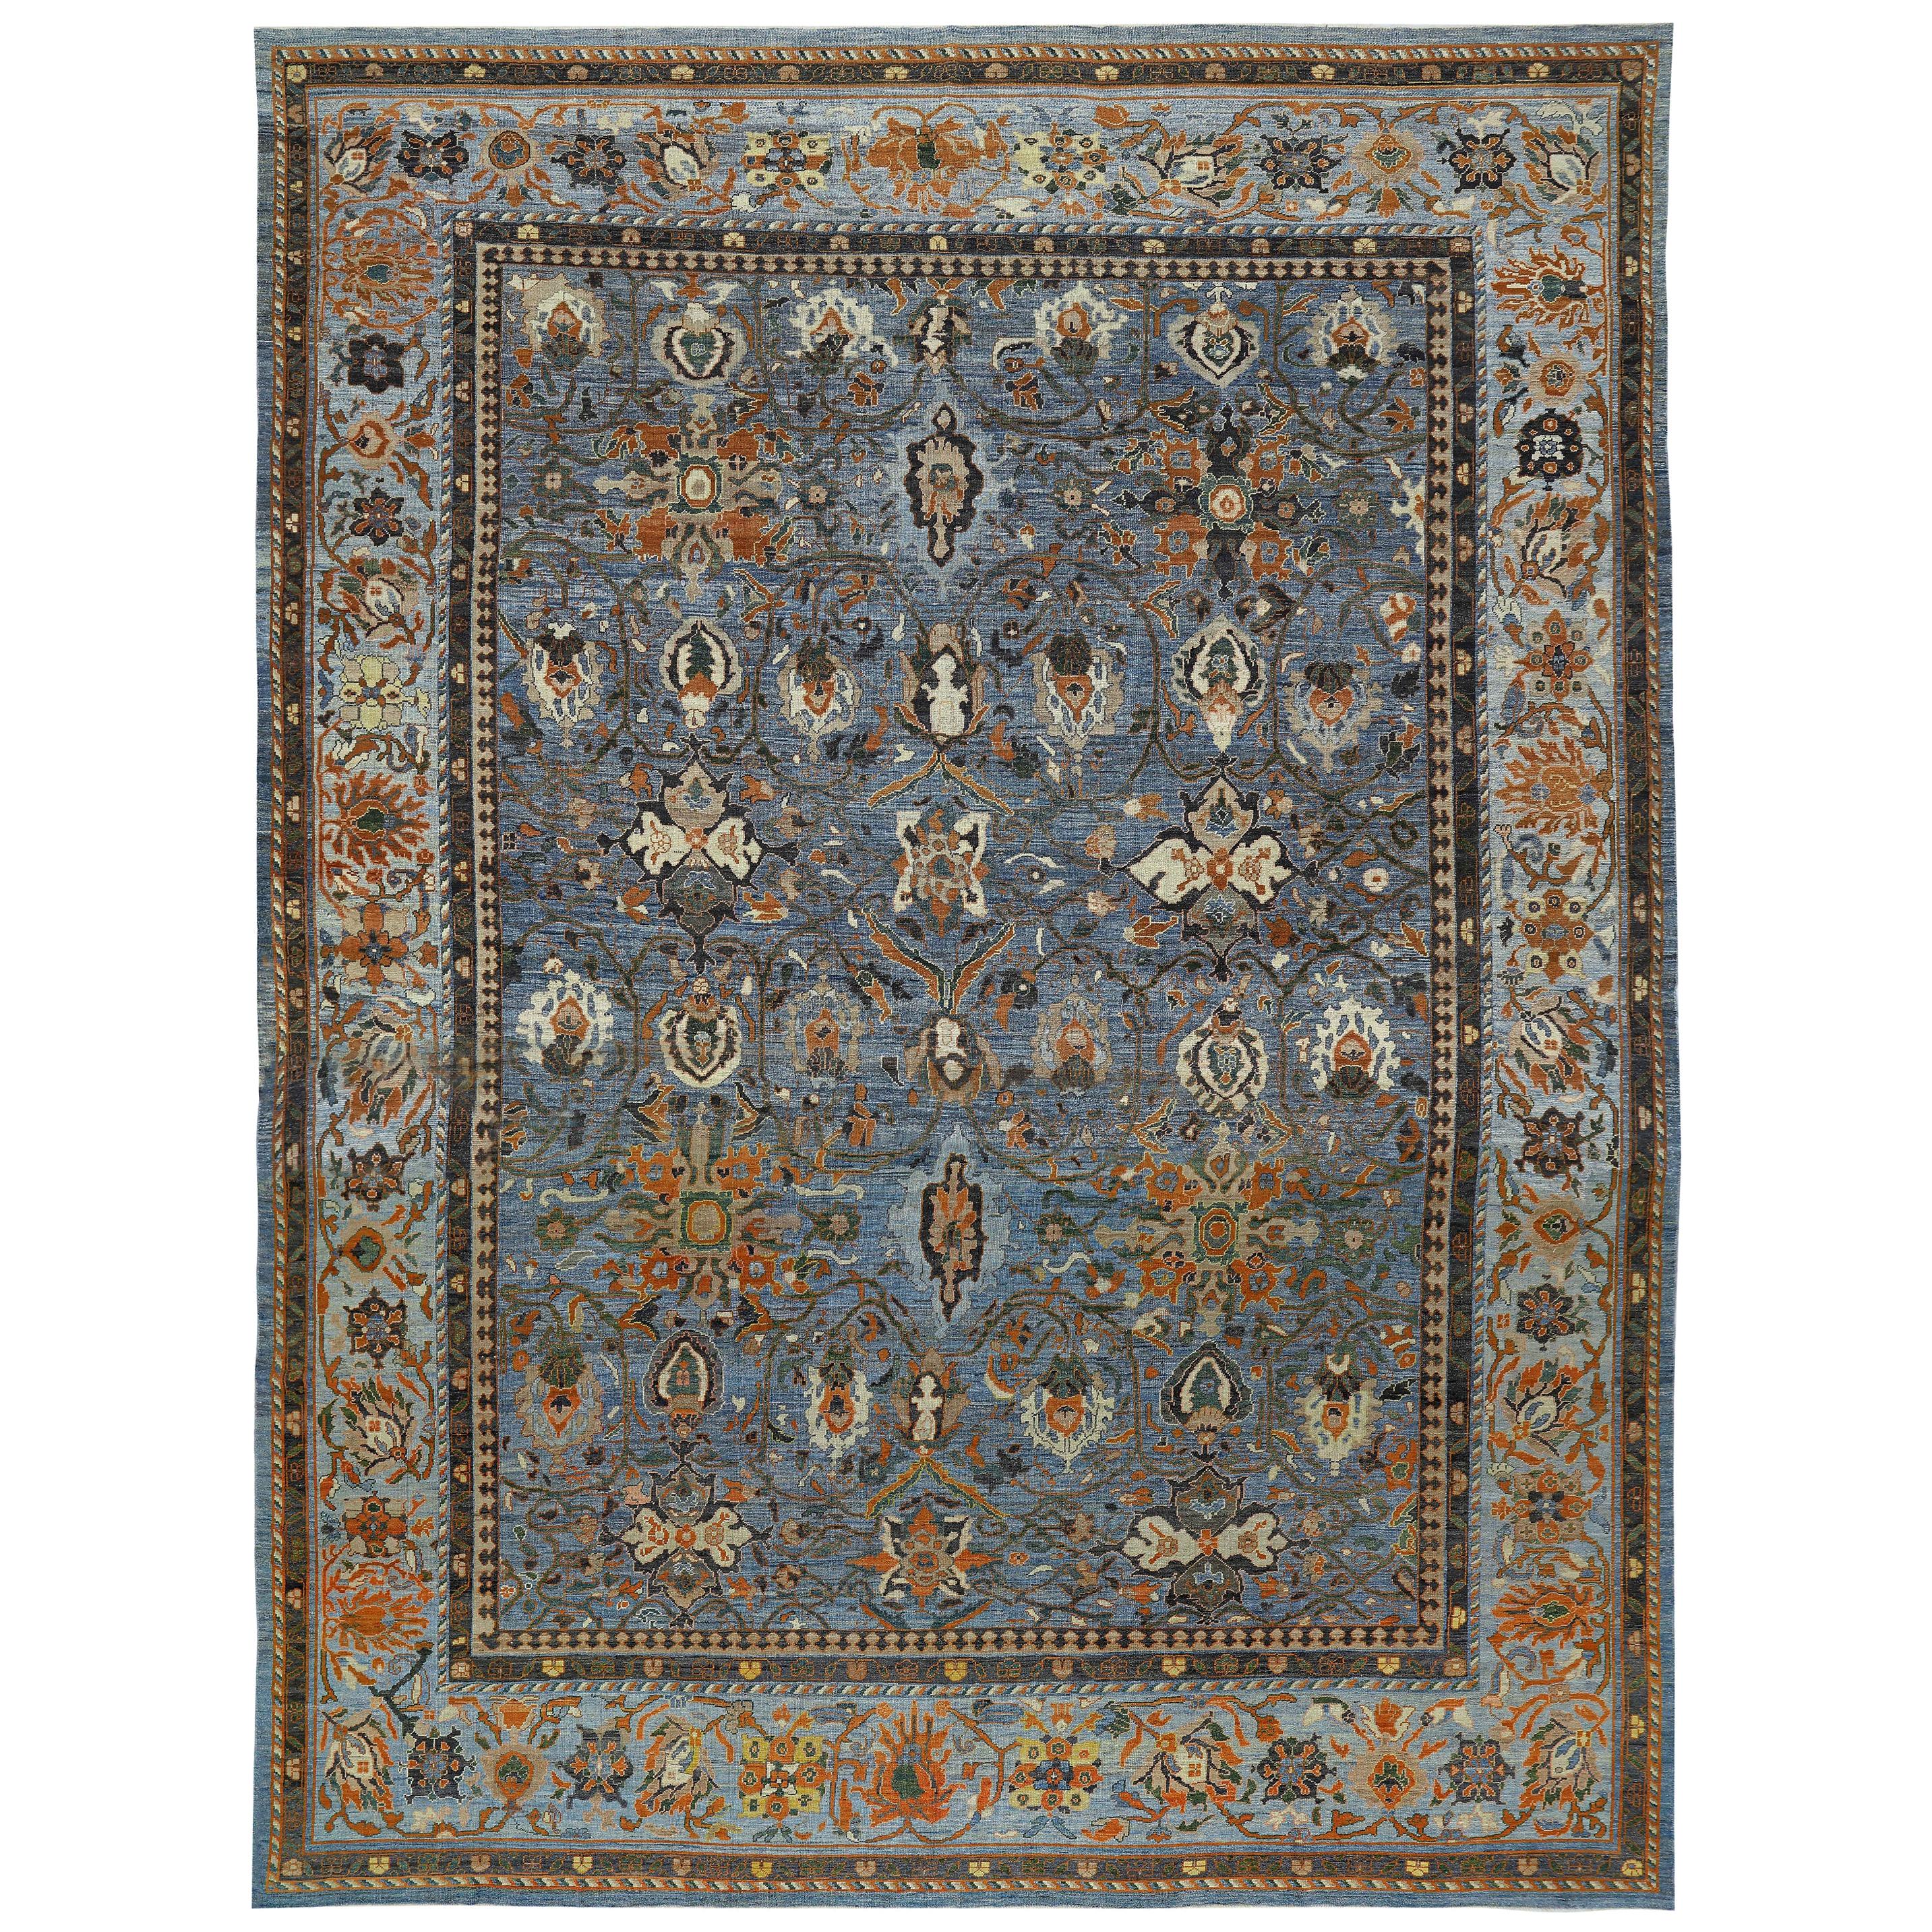 Oversize Persian Oushak Style Rug with Ivory & Brown Floral Details on Blue Fiel